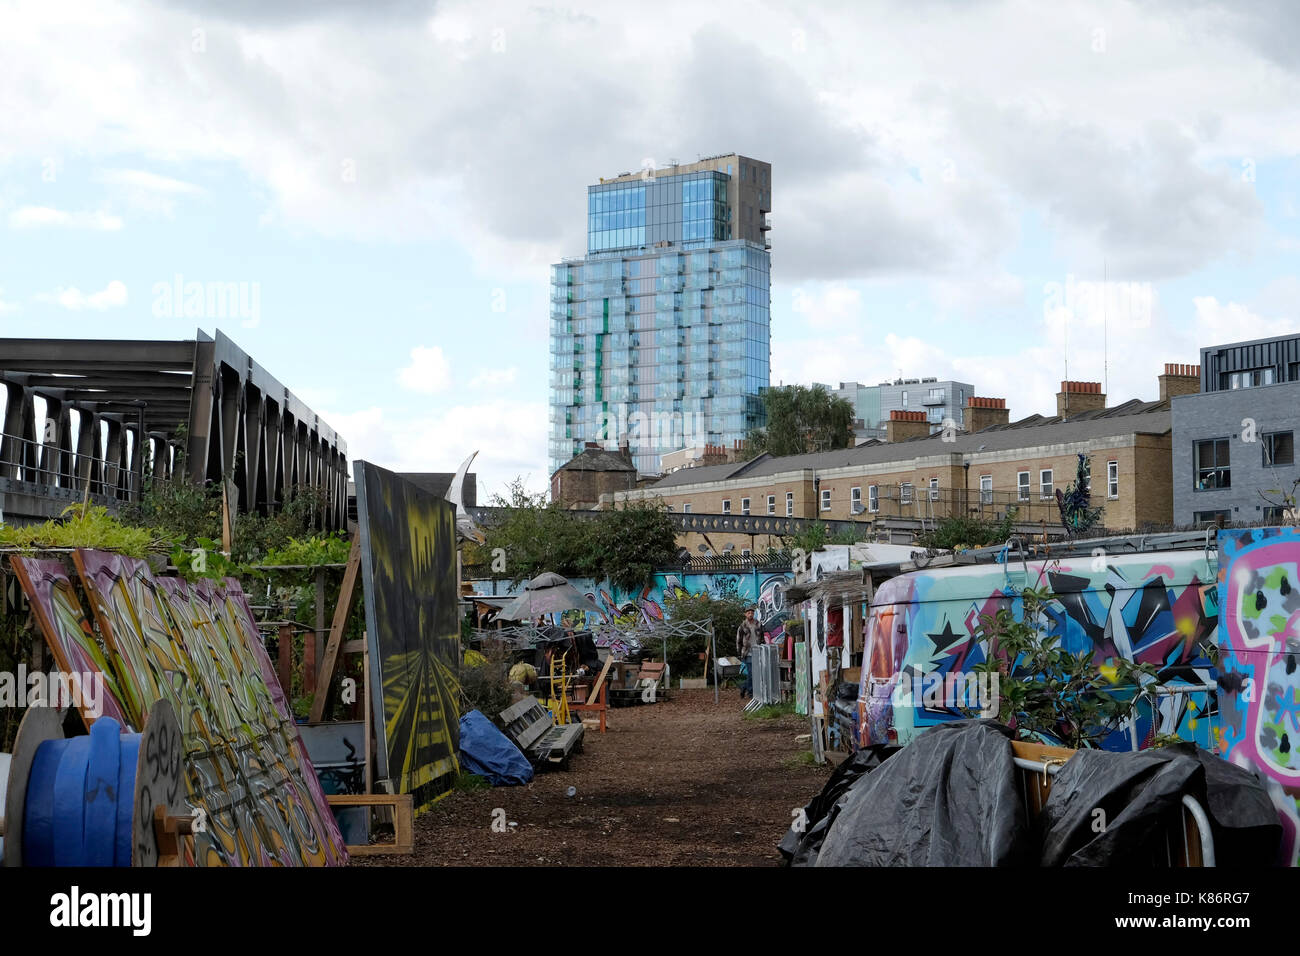 A general view of the nomadic community gardens, Brick Lane, London Stock Photo